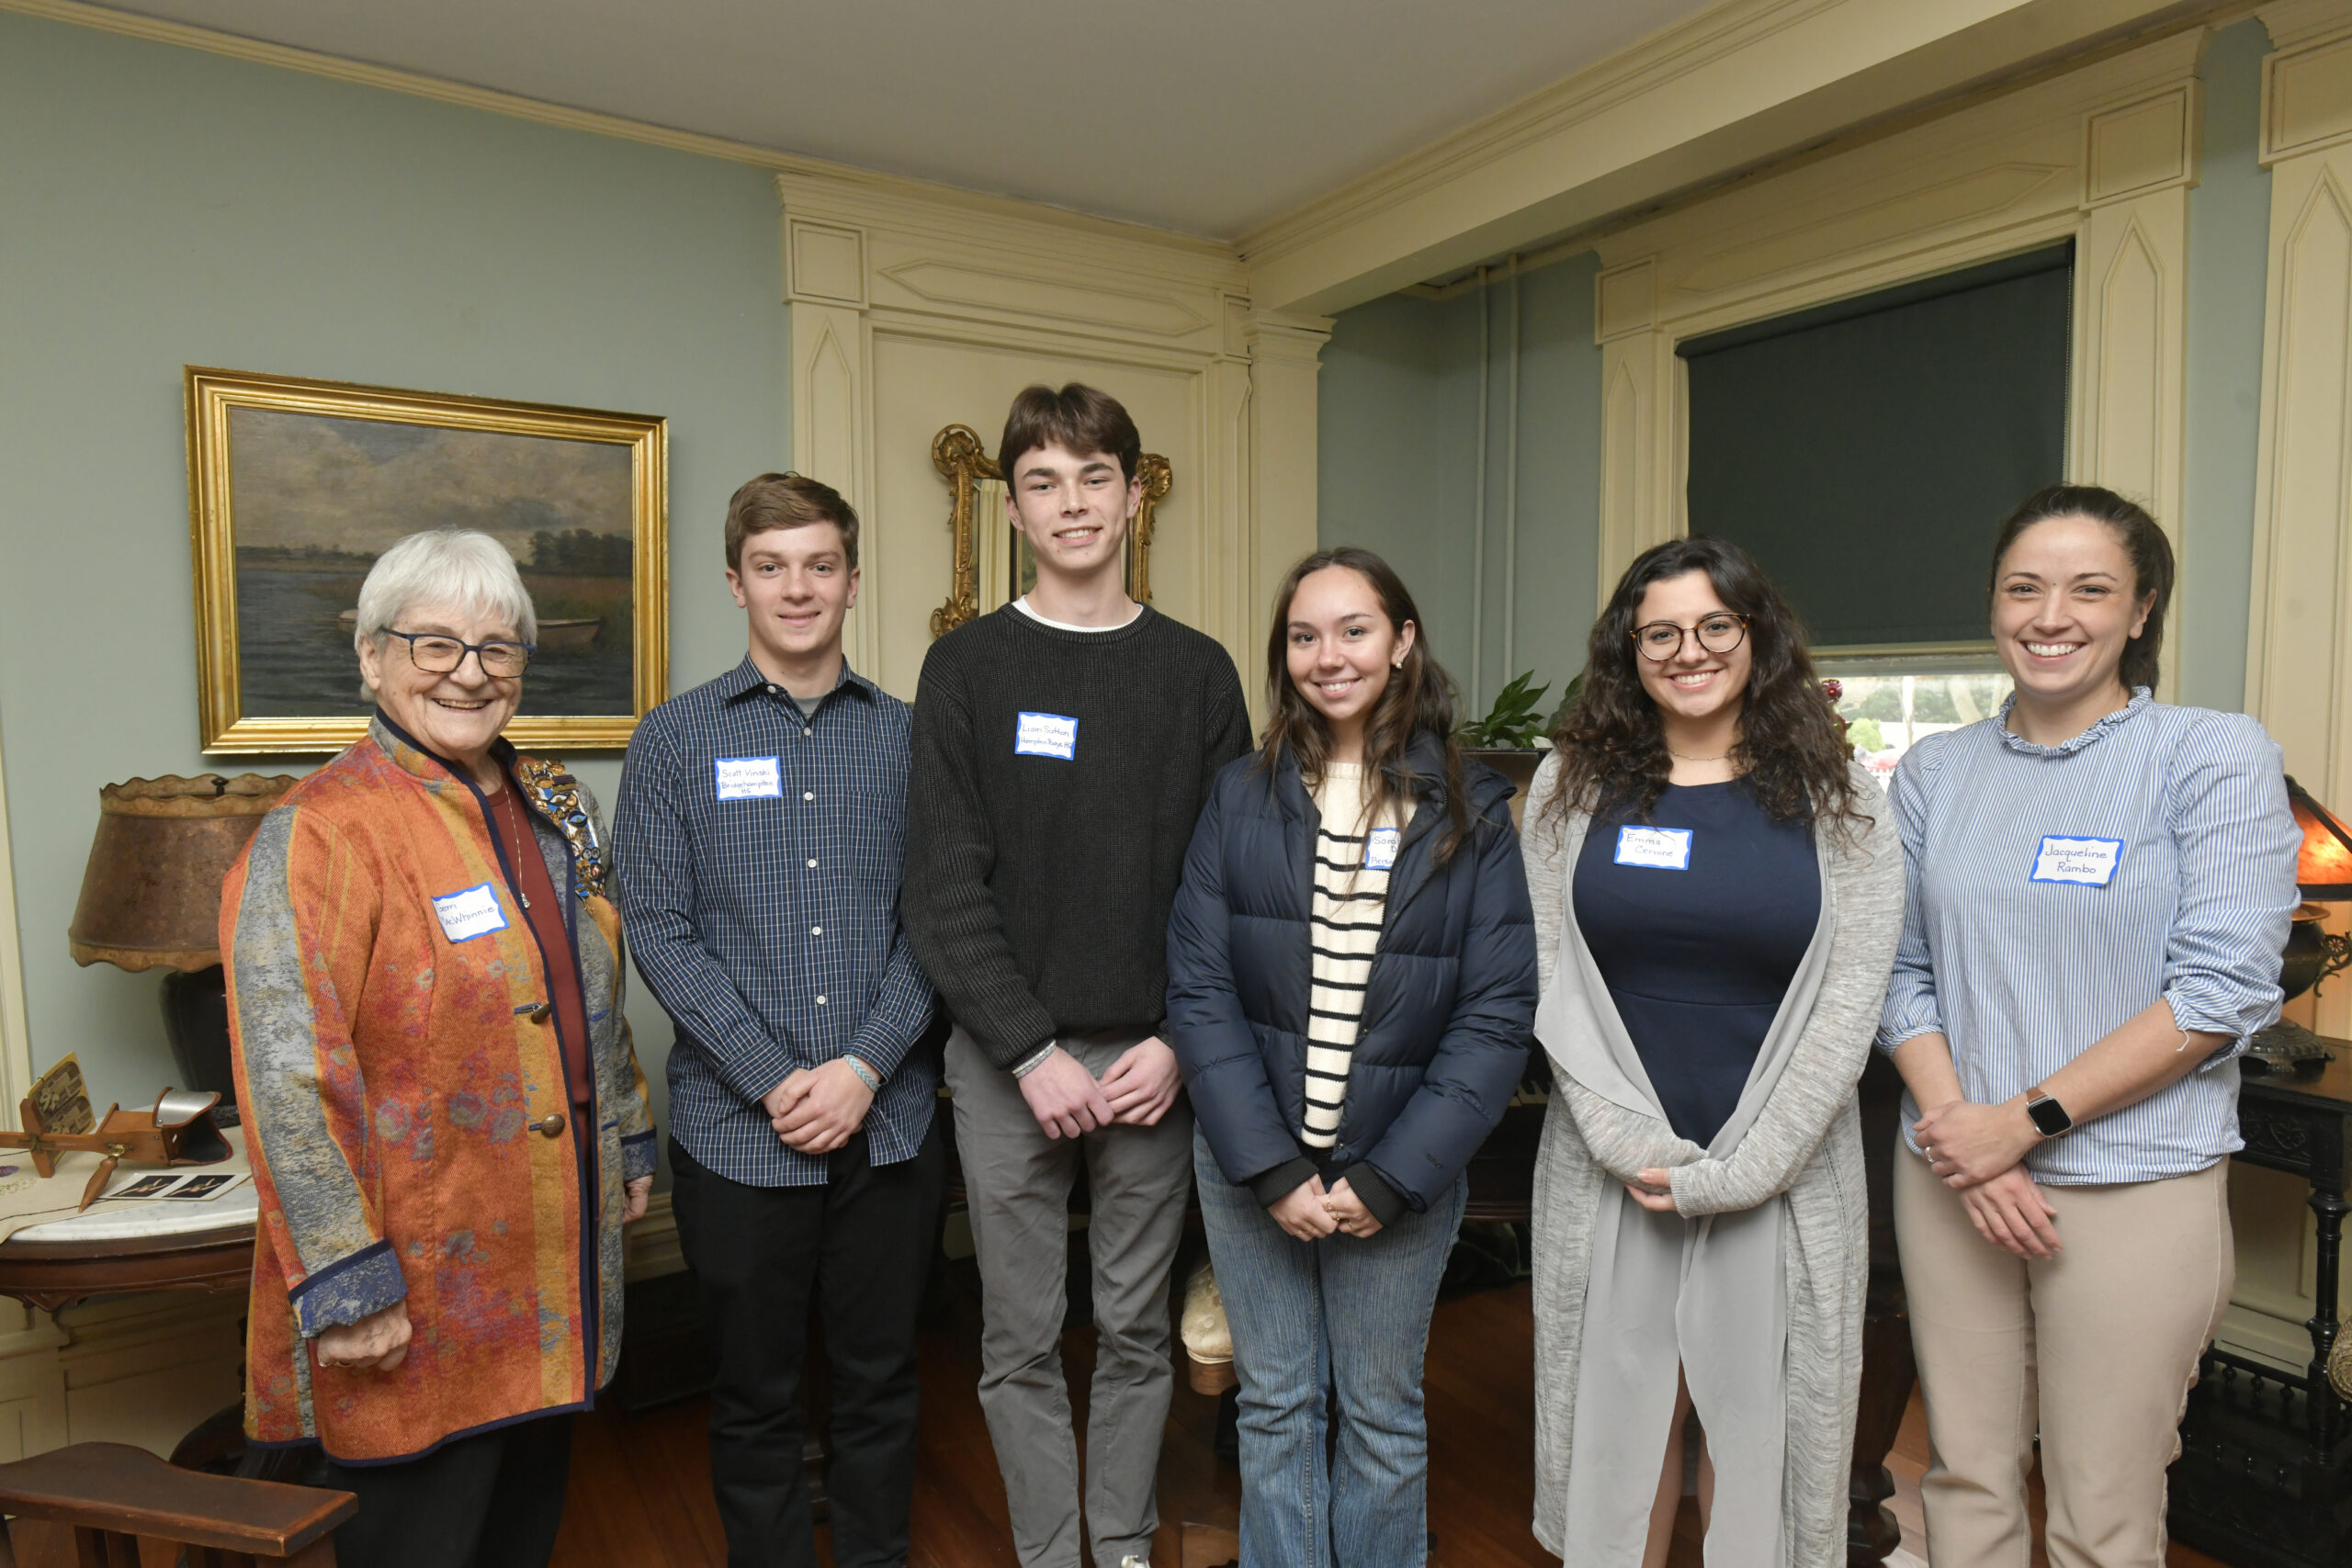 The Southampton Colony Chapter of the Daughters of the american Revolution recently presented the Good Citizen Scholarship Awards to local students. Left to right are, Chairwoman, Gerri MacWhinnie; Scott Vinski, Bridgehampton High School; Liam Sutton, Hampton Bays High School; Sarah D'Angelo, Pierson High School; Emma Cervone, Southampton High School: and Southampton Colony DAR Regent Jacqueline Rambo.   DANA SHAW